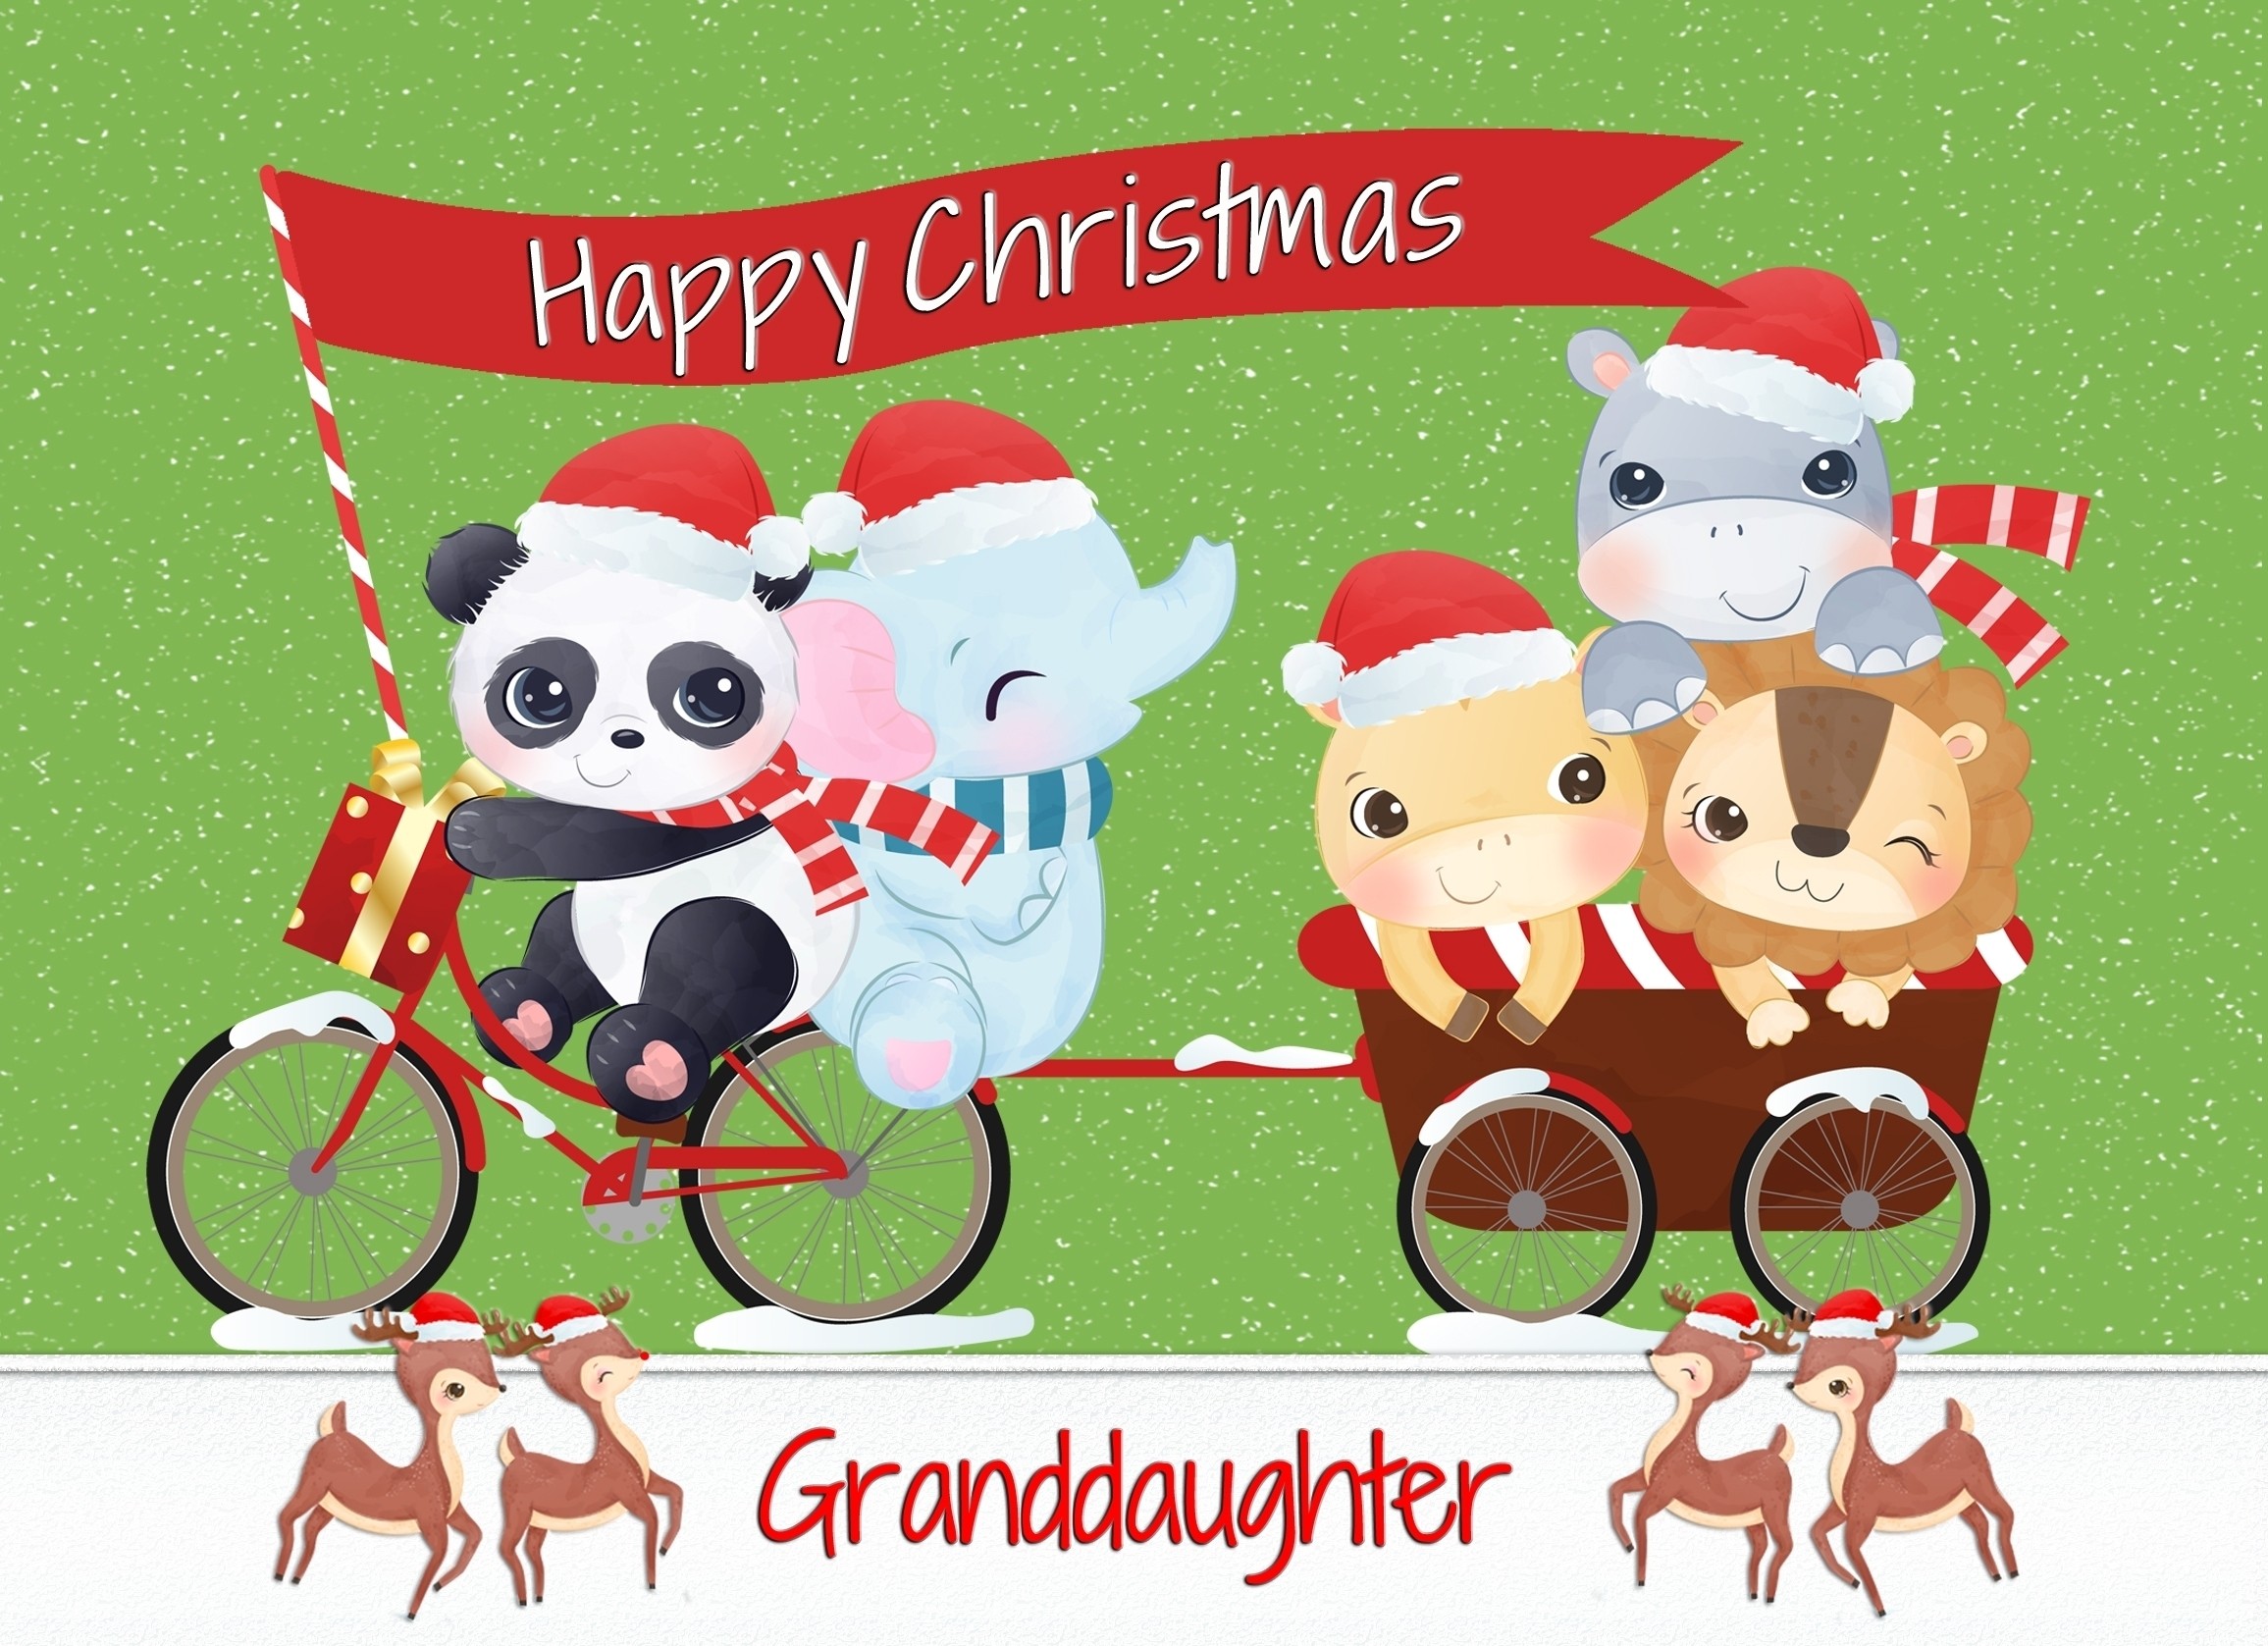 Christmas Card For Granddaughter (Green Animals)